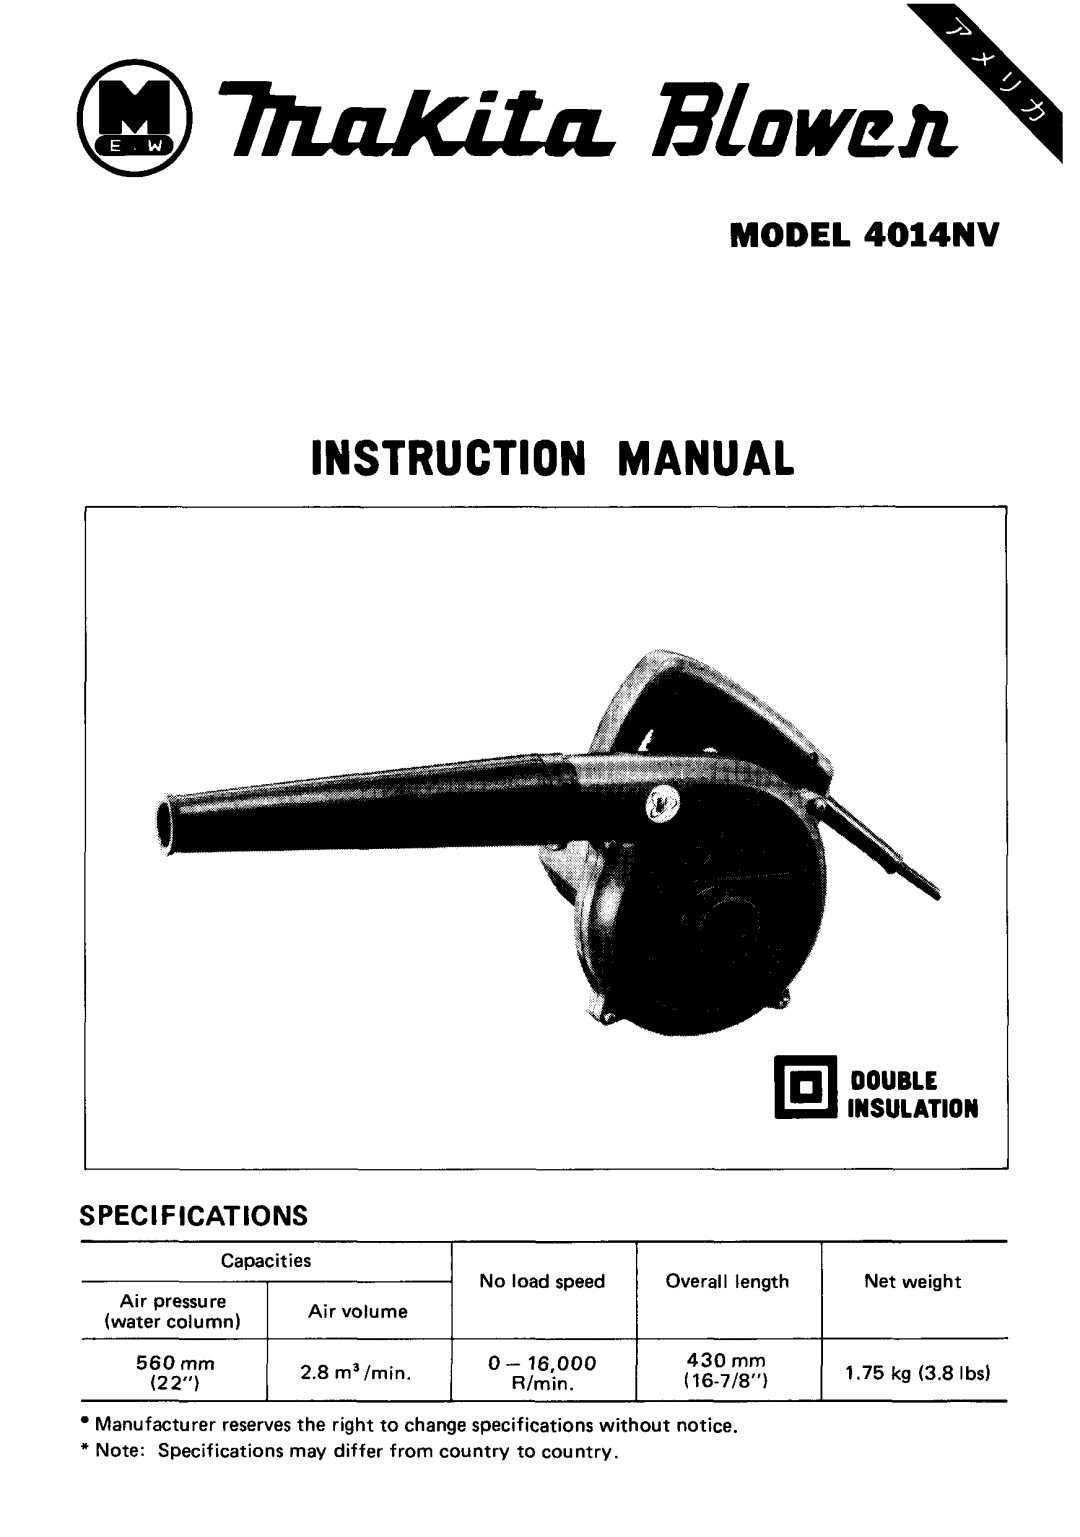 Makita instruction manual MODEL 4014NV, SPEC1FlCATlONS, Double Insulation, Caoacities, Air pressure, Air volume, 22 ~ 